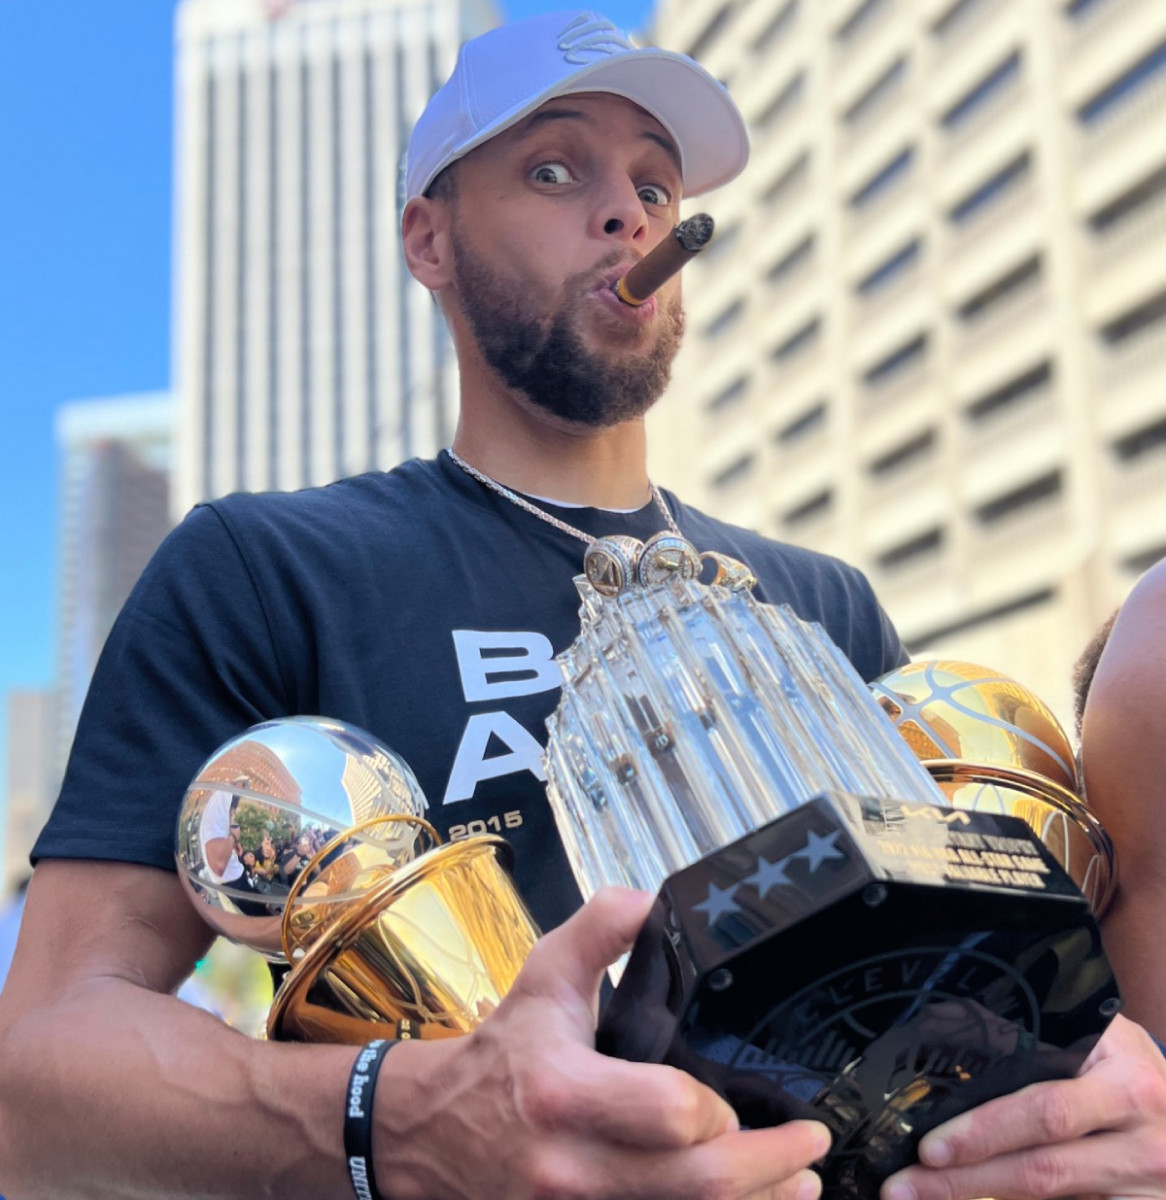 Stephen Curry Shares An Iconic Picture With A Cigar And All His Trophies: "What They Gonna Say Now?"